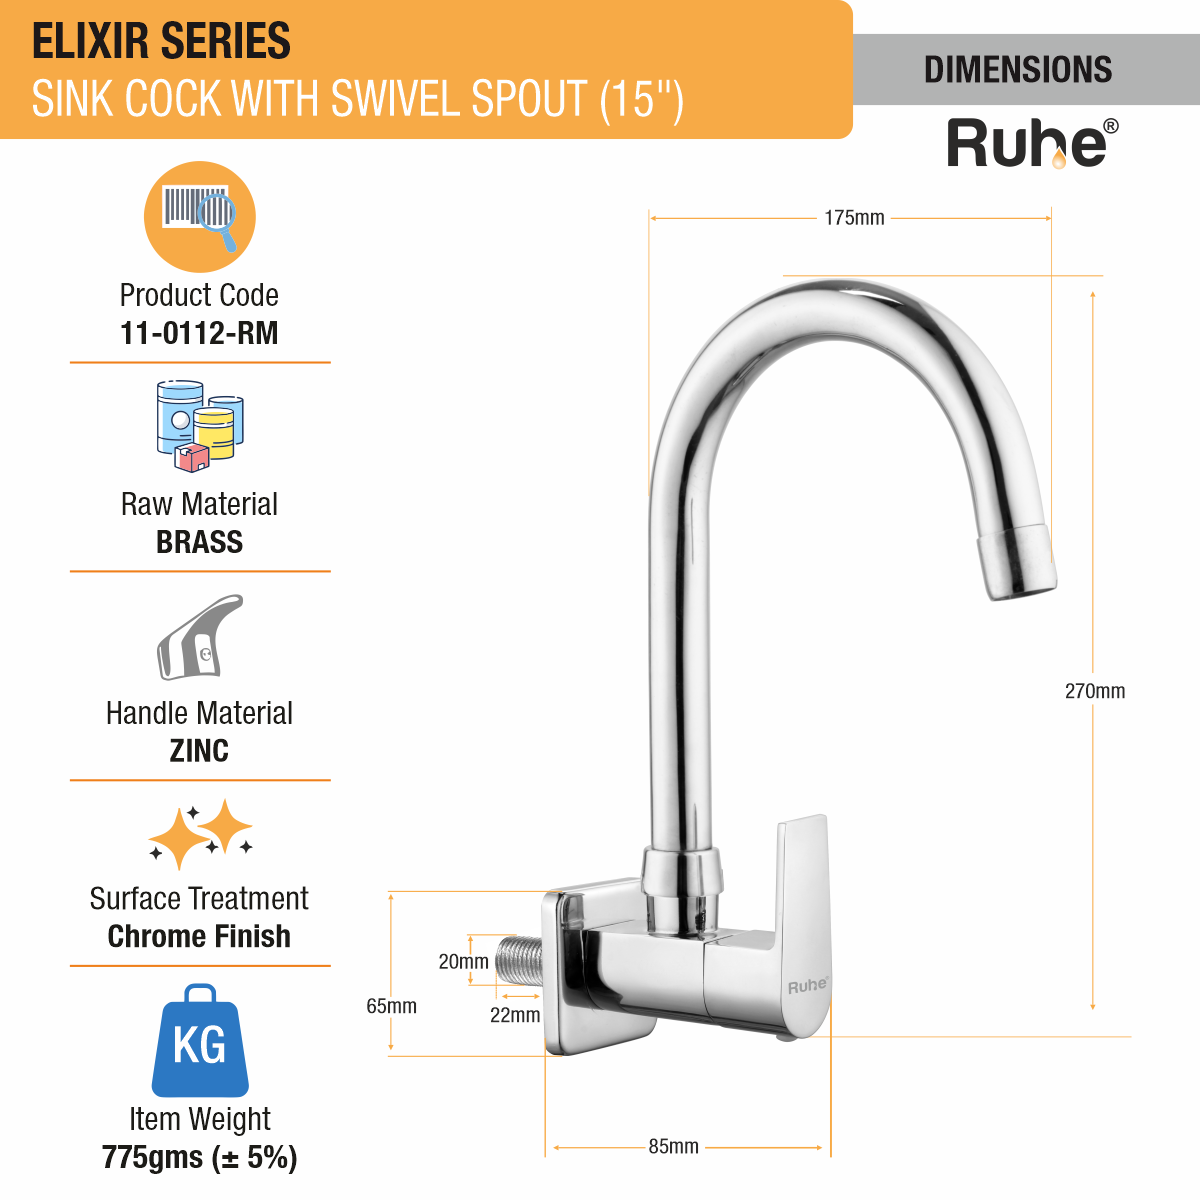 Elixir Sink Tap with Medium (15 inches) Round Swivel Spout Faucet dimensions and size